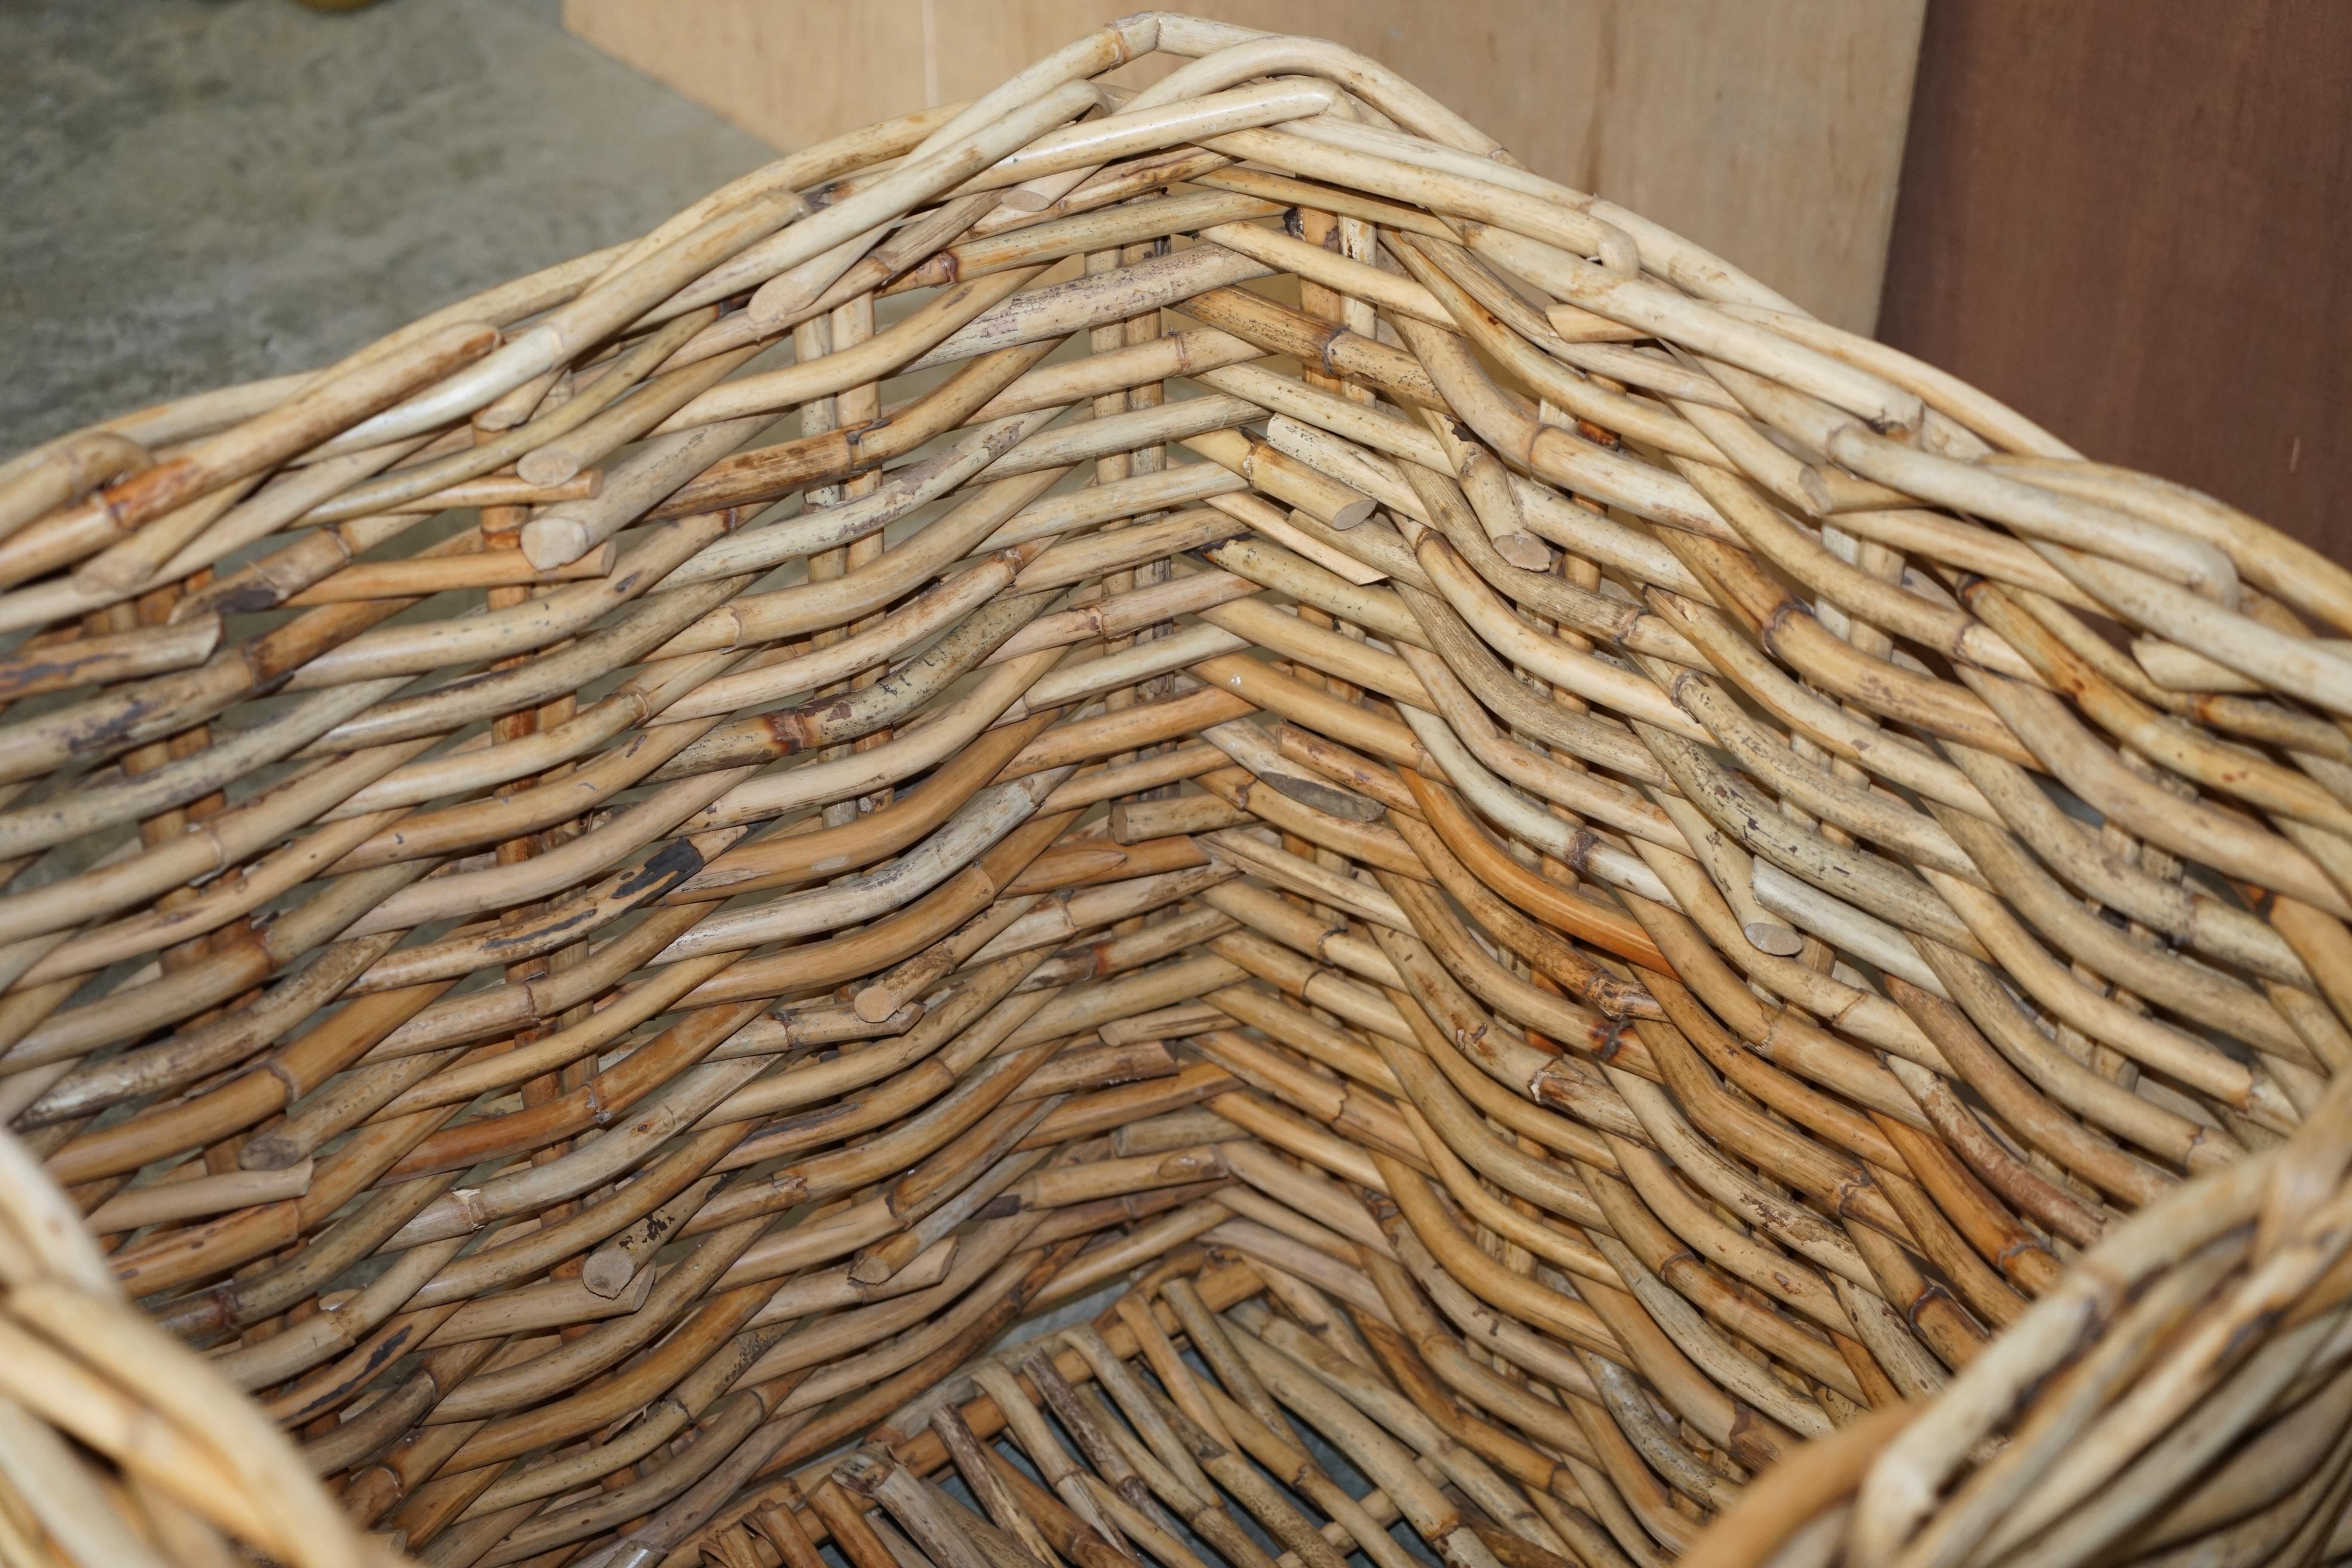 Hand-Crafted Stunning Huge Vintage Wicker Rattan Log or Linen Laundry Basket for Fabric Rolls